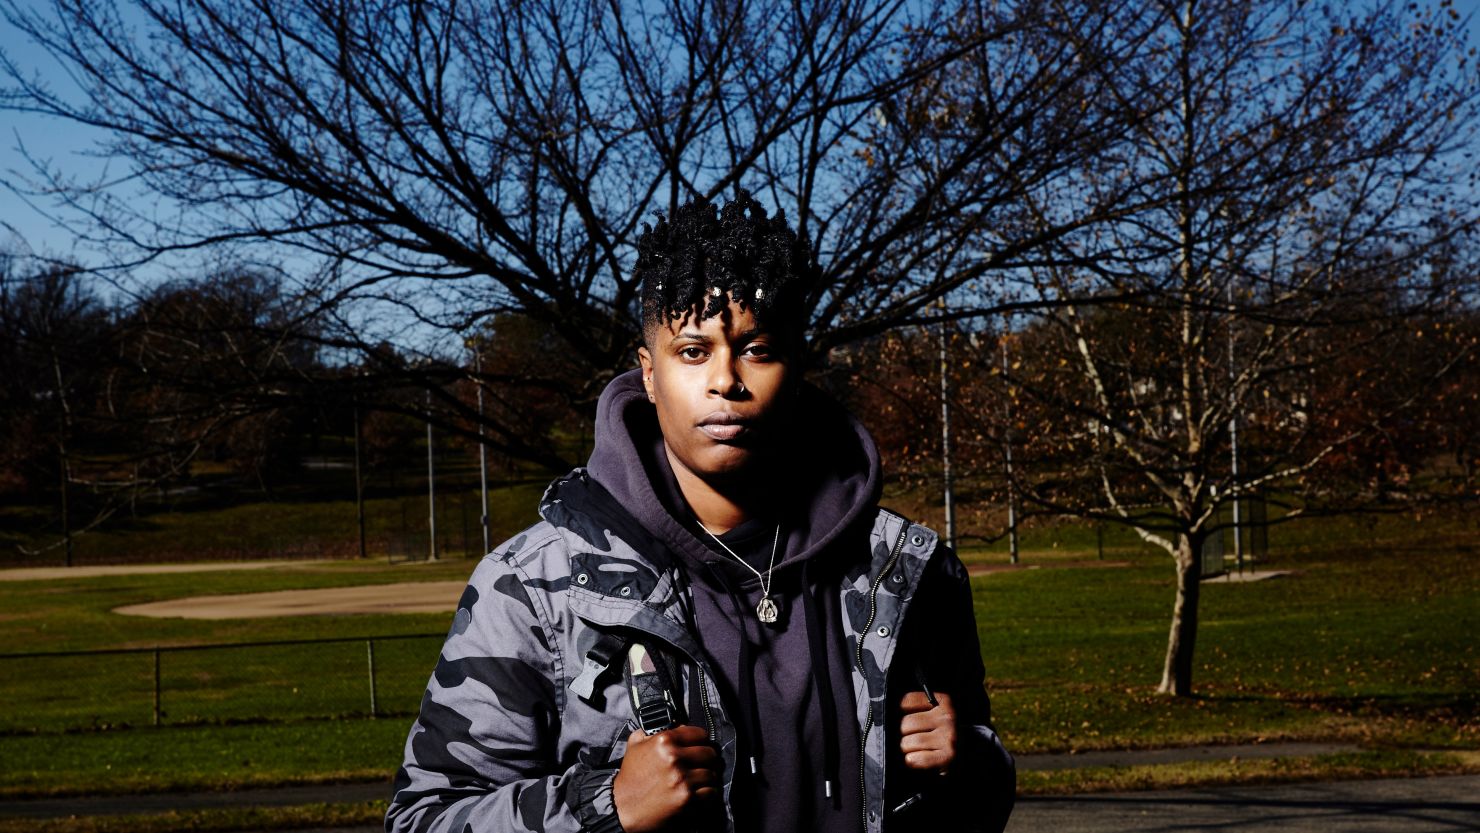 Brittony McKenney is one of eleven Baltimoreans photographed in the months after the death of Freddie Gray.